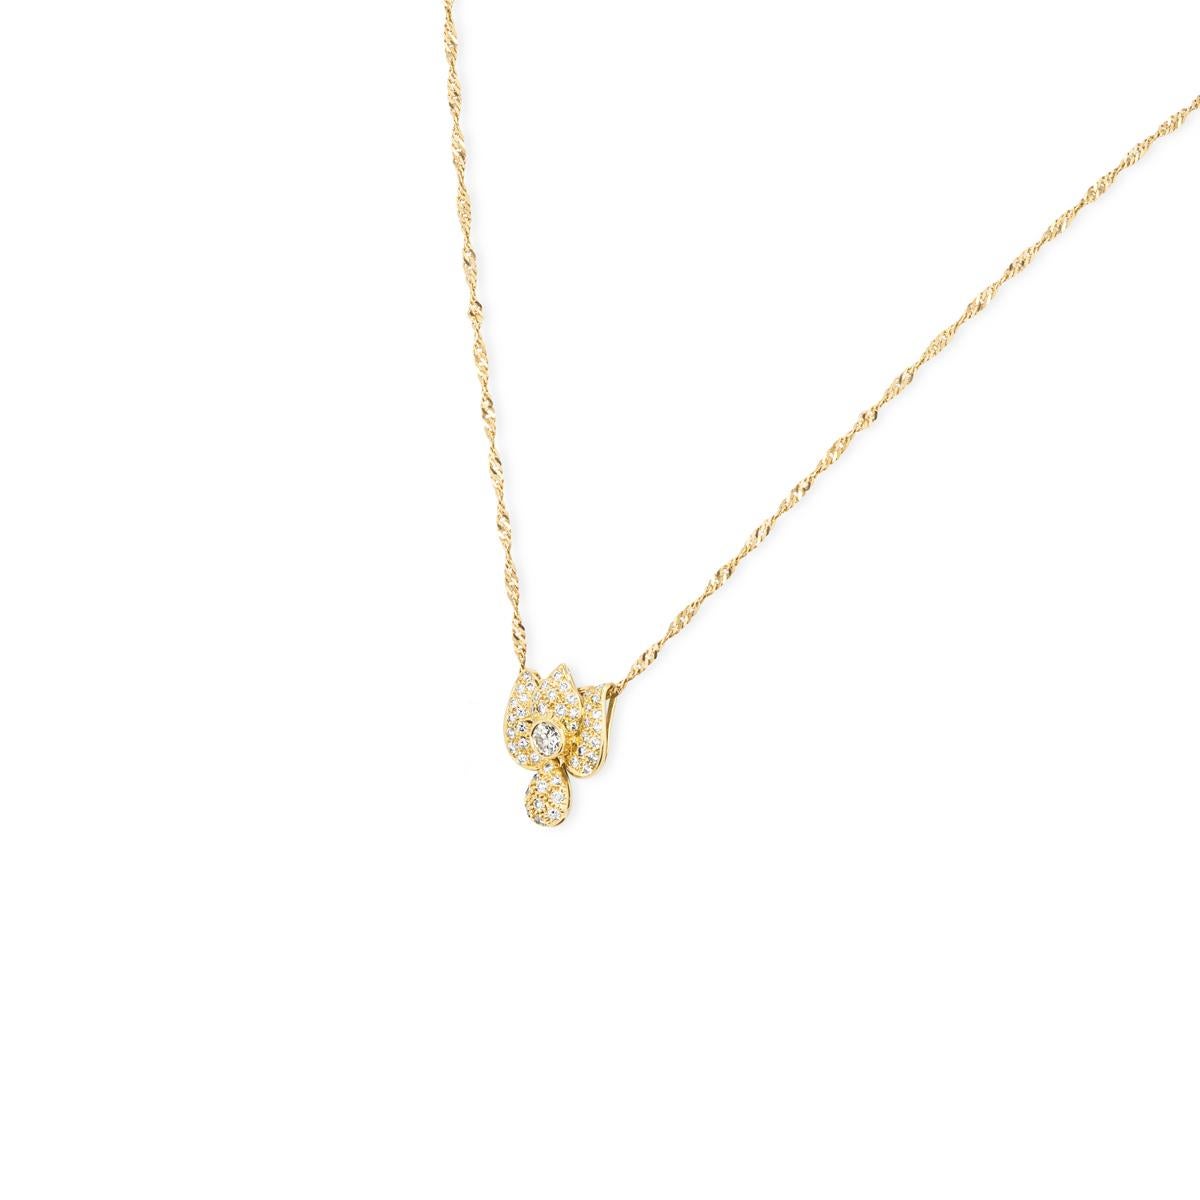 A radiant 18k yellow gold diamond floral pendant. The pendant features a floral design with a freely moving tear drop motif suspended underneath. Set to the centre of the pendant is a round brilliant cut diamond in a rubover setting weighing